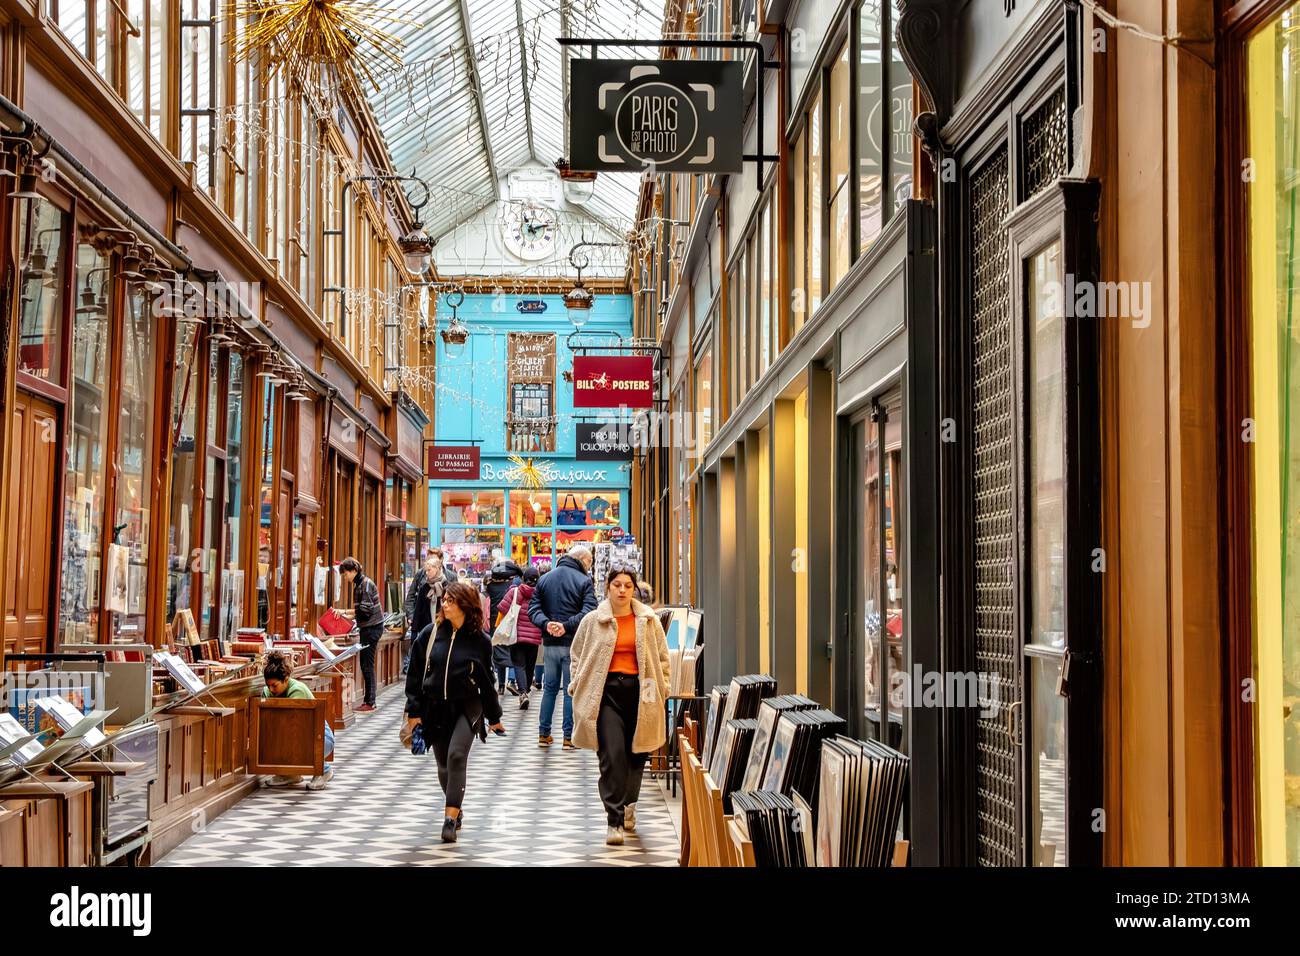 Completed in 1846,Passage Jouffroy is one of the most popular covered shopping arcades in Paris ,located in the 9th arrondissement of Paris, France Stock Photo